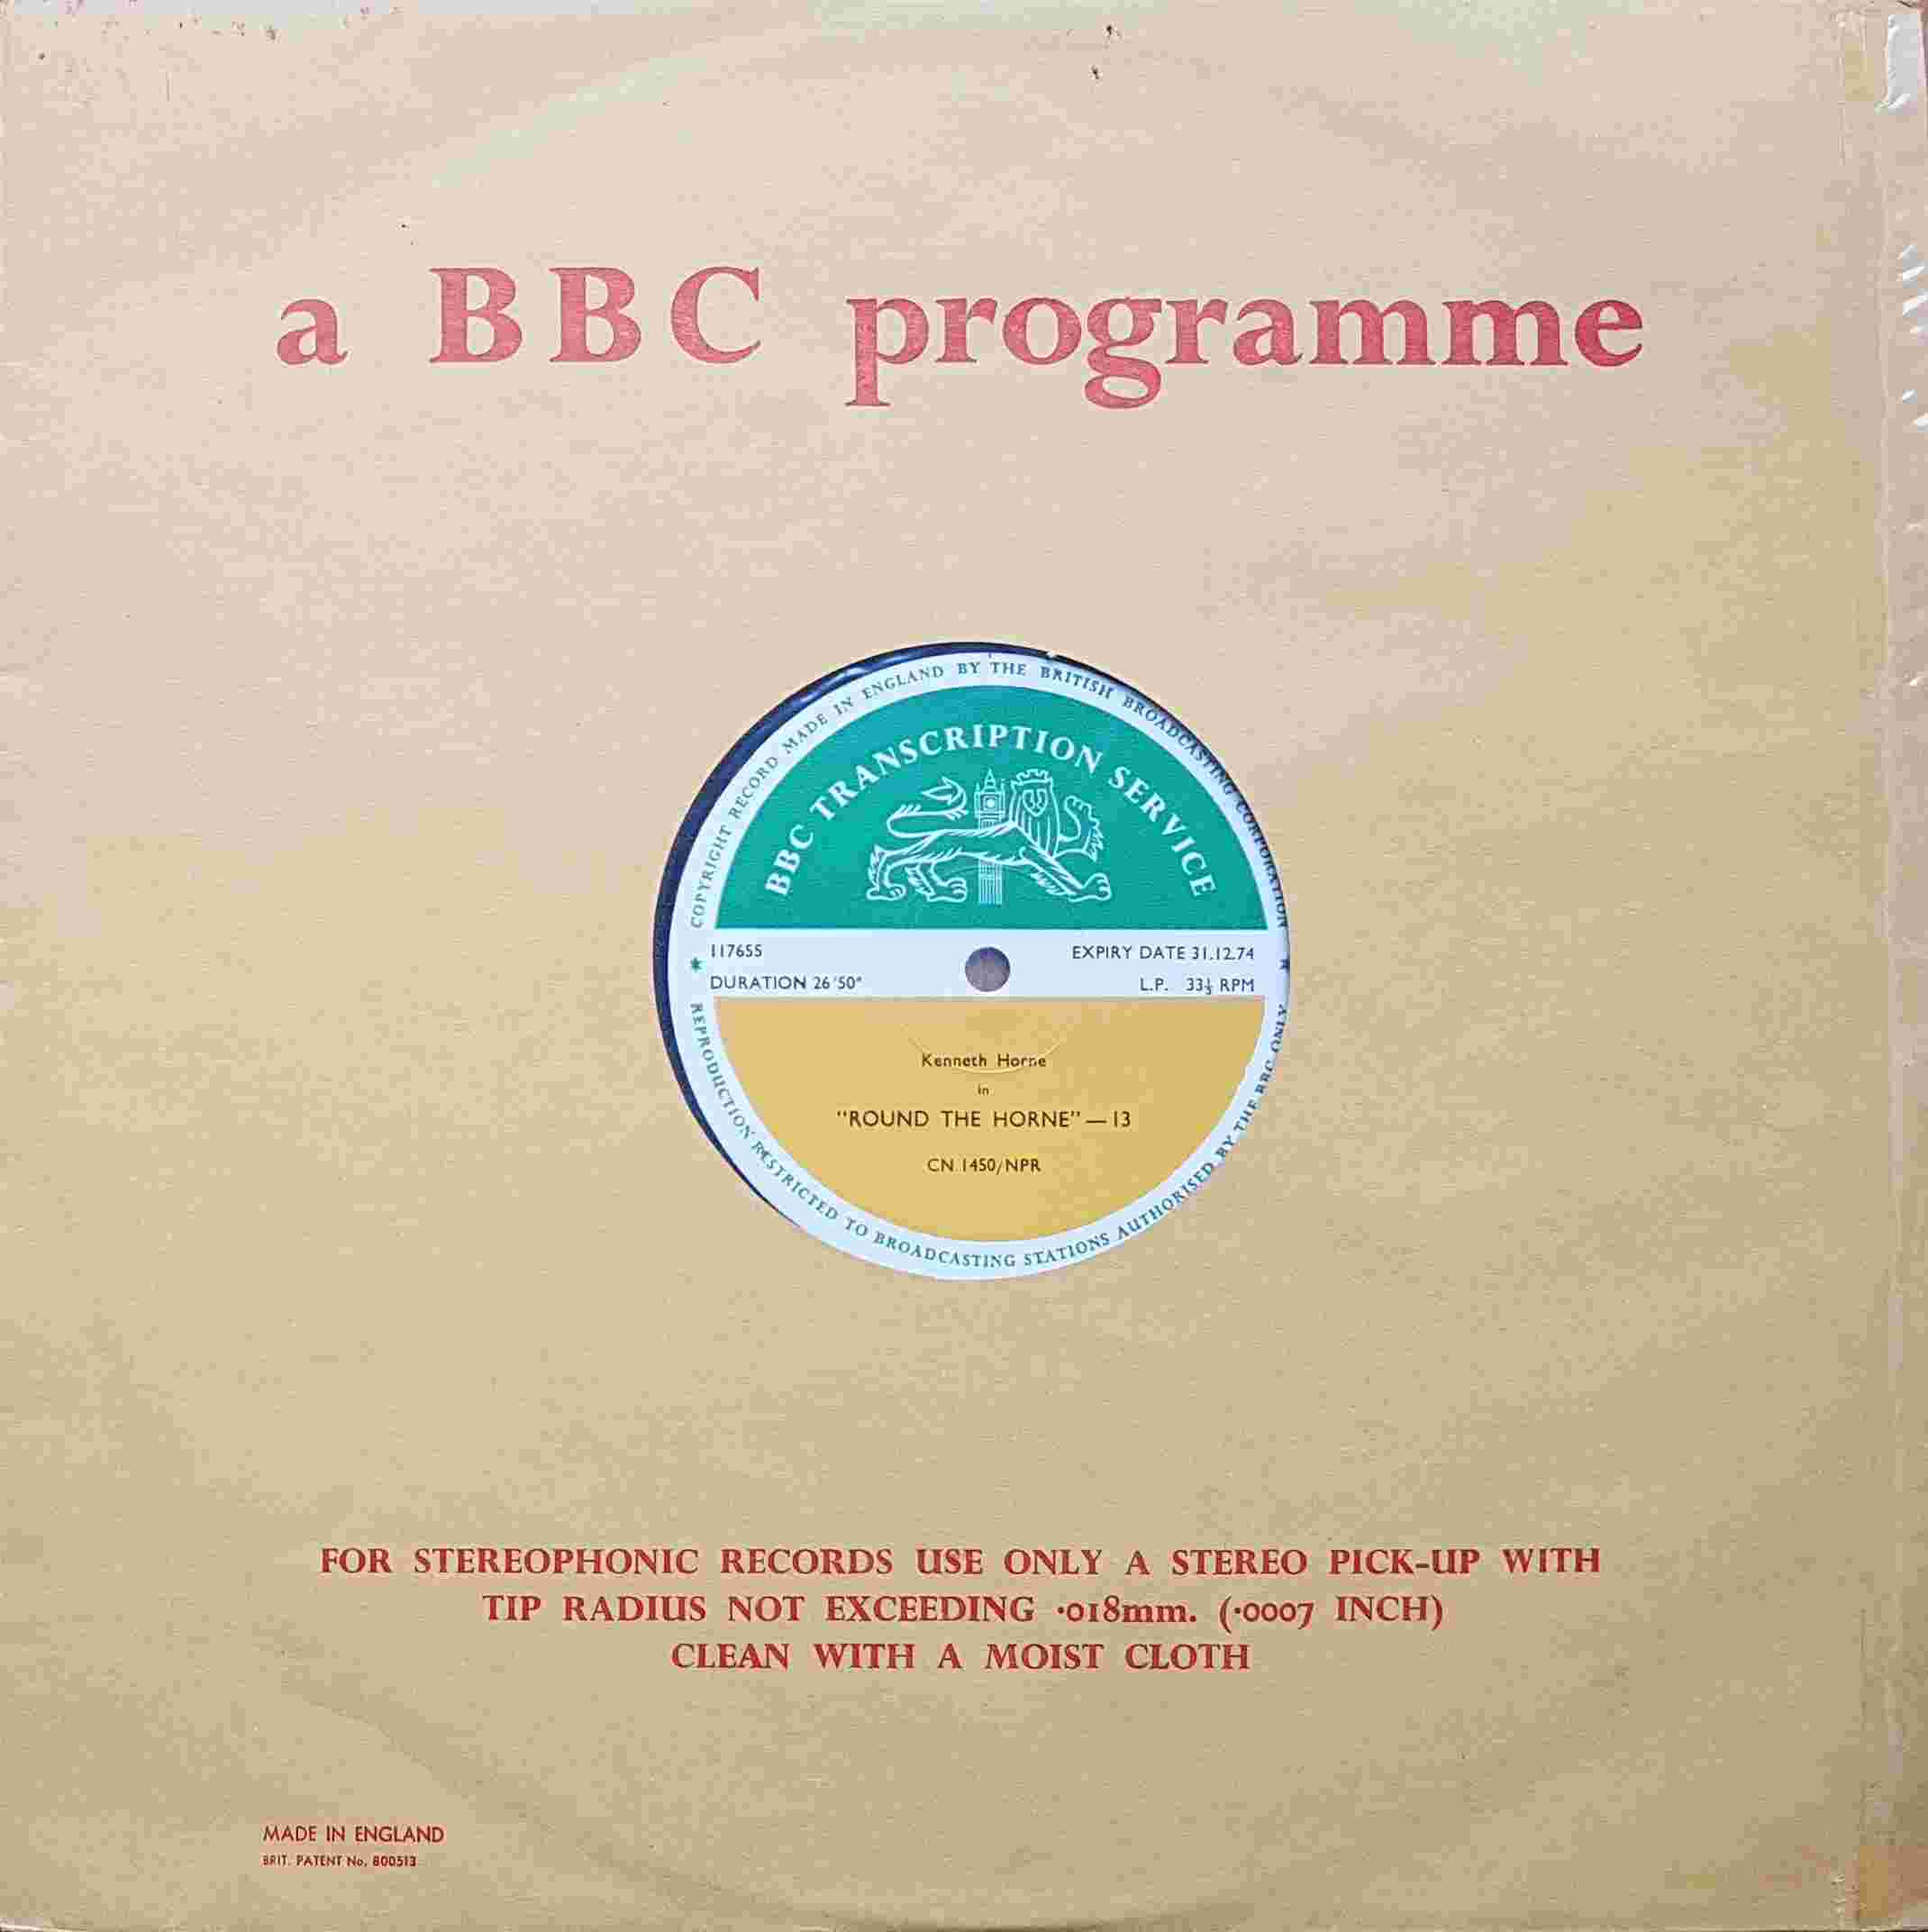 Picture of CN 1450 NPR 7 Round the Horne - 13 & 14 by artist Kenneth Horne from the BBC albums - Records and Tapes library